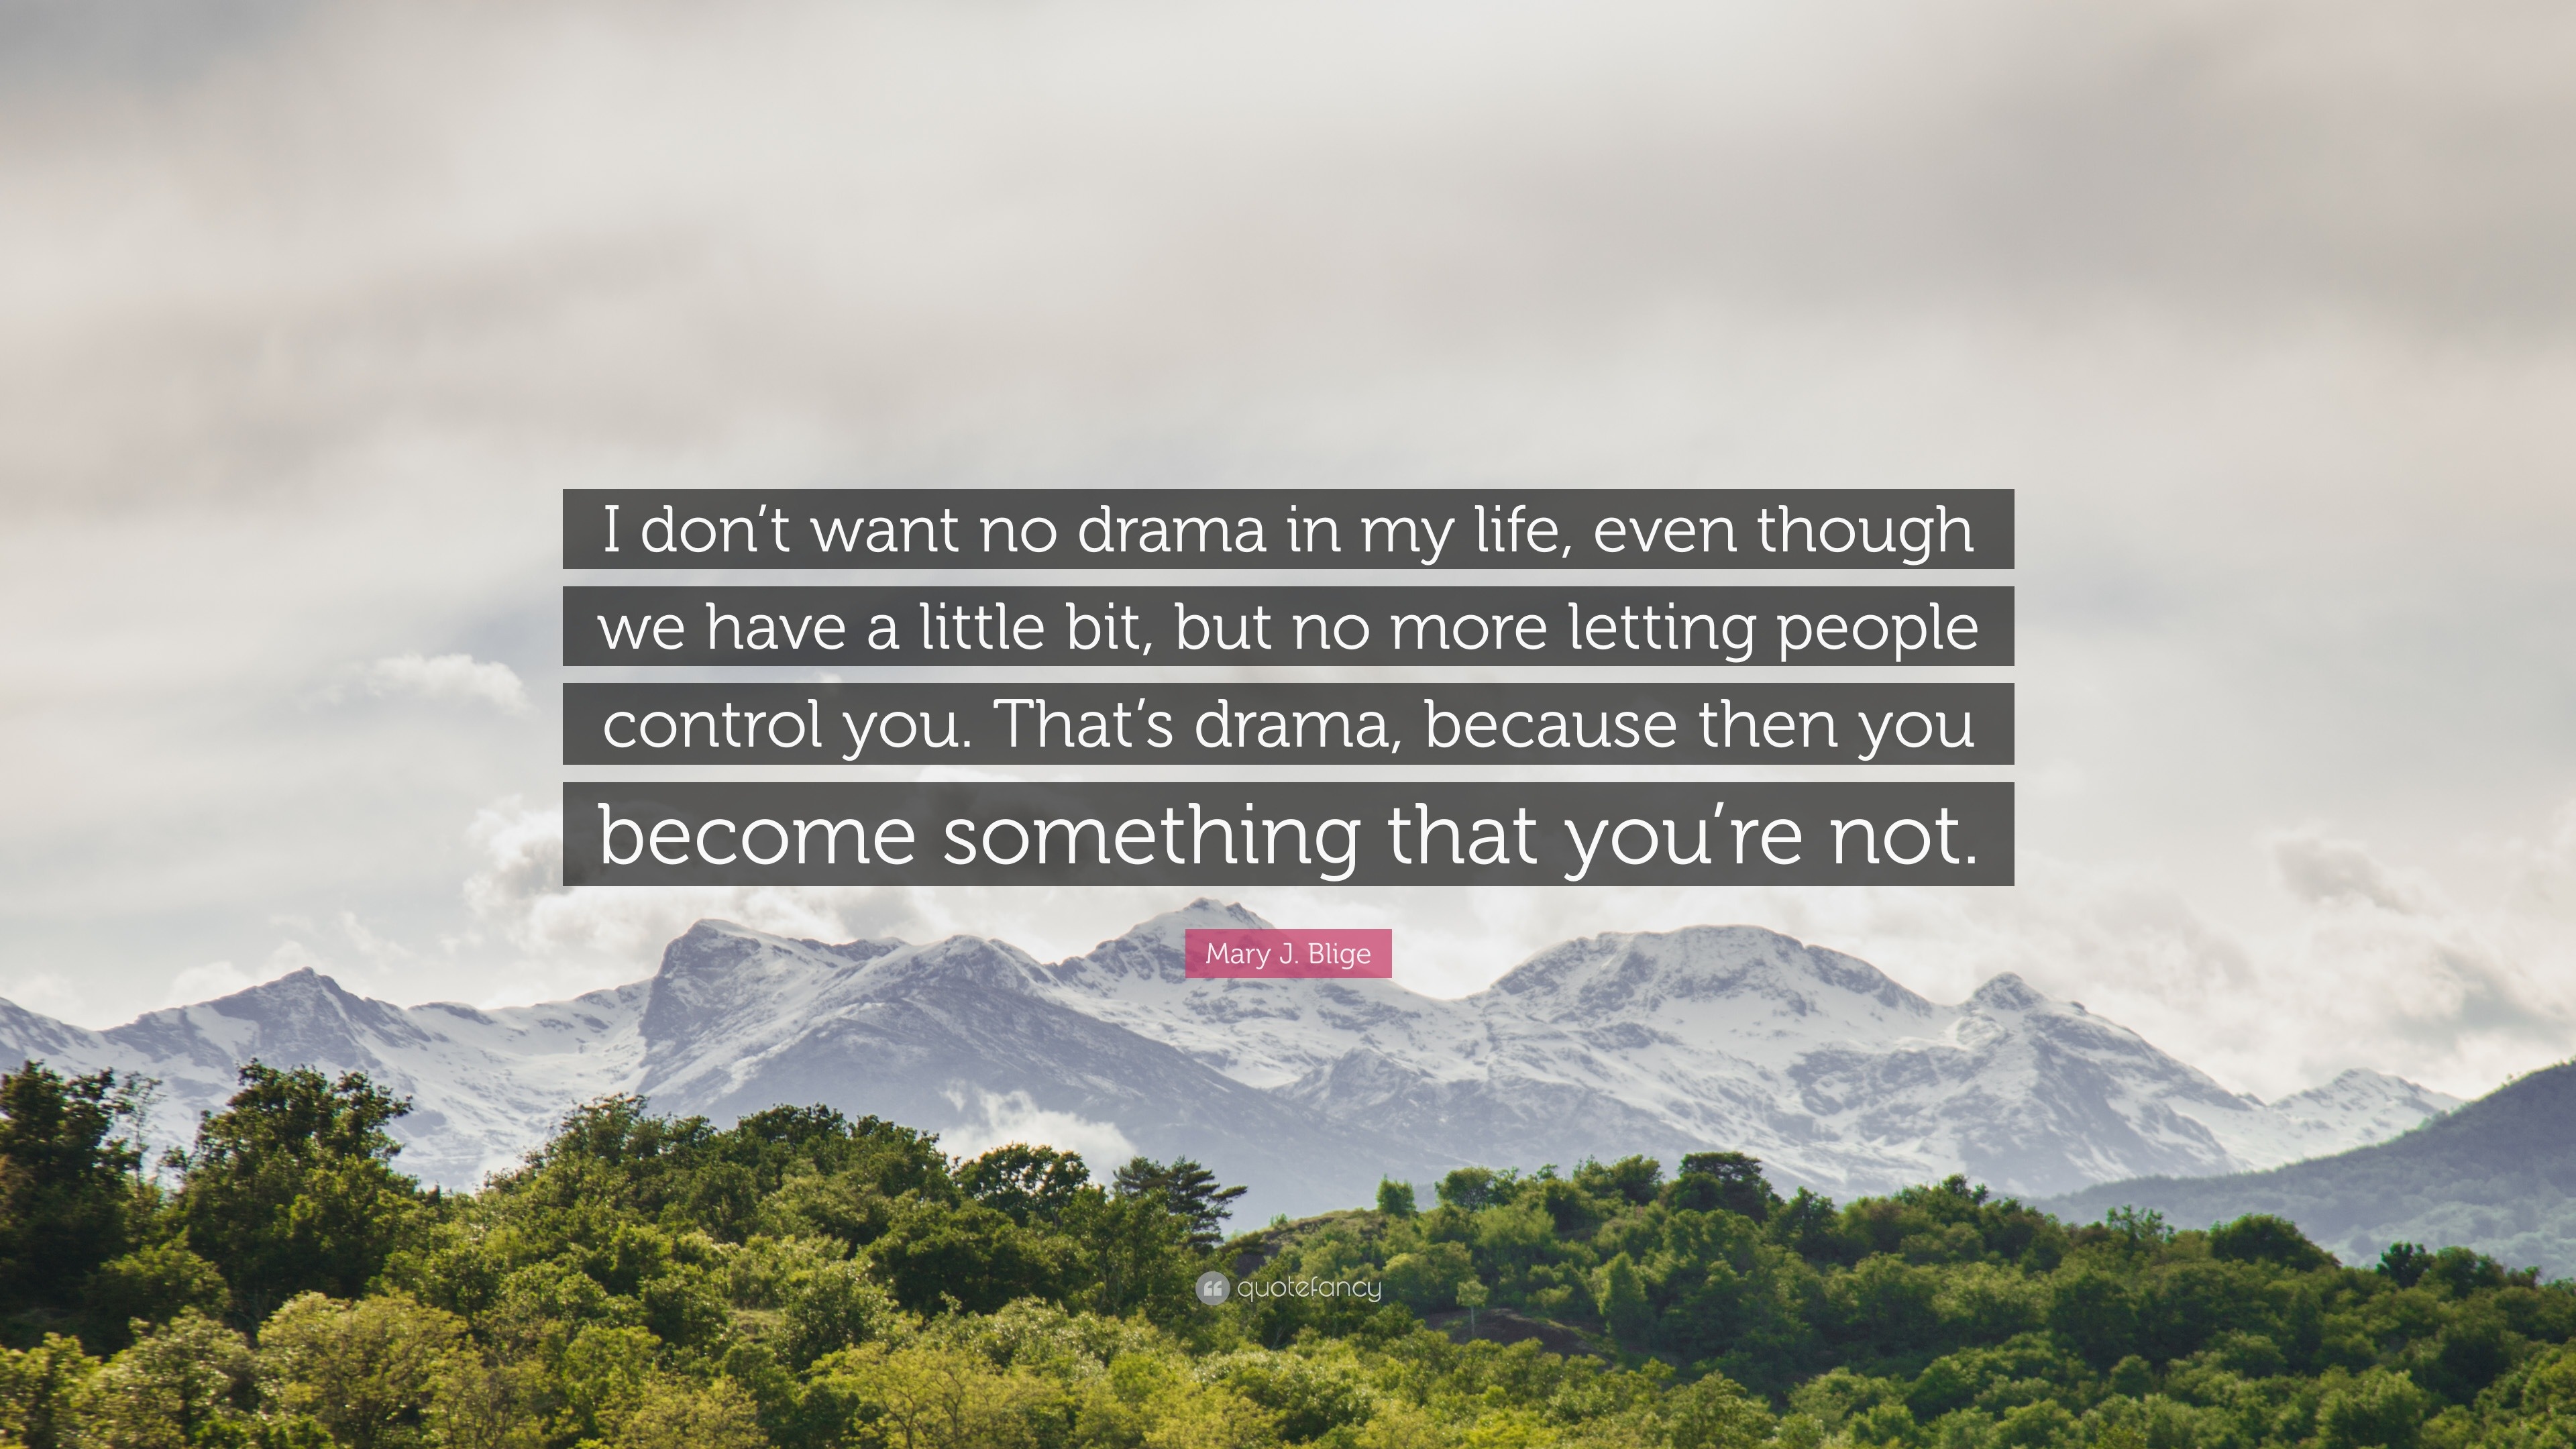 Mary J. Blige Quote: “I Don't Want No Drama In My Life, Even Though We Have A Little Bit, But No More Letting People Control You. That's Drama...”